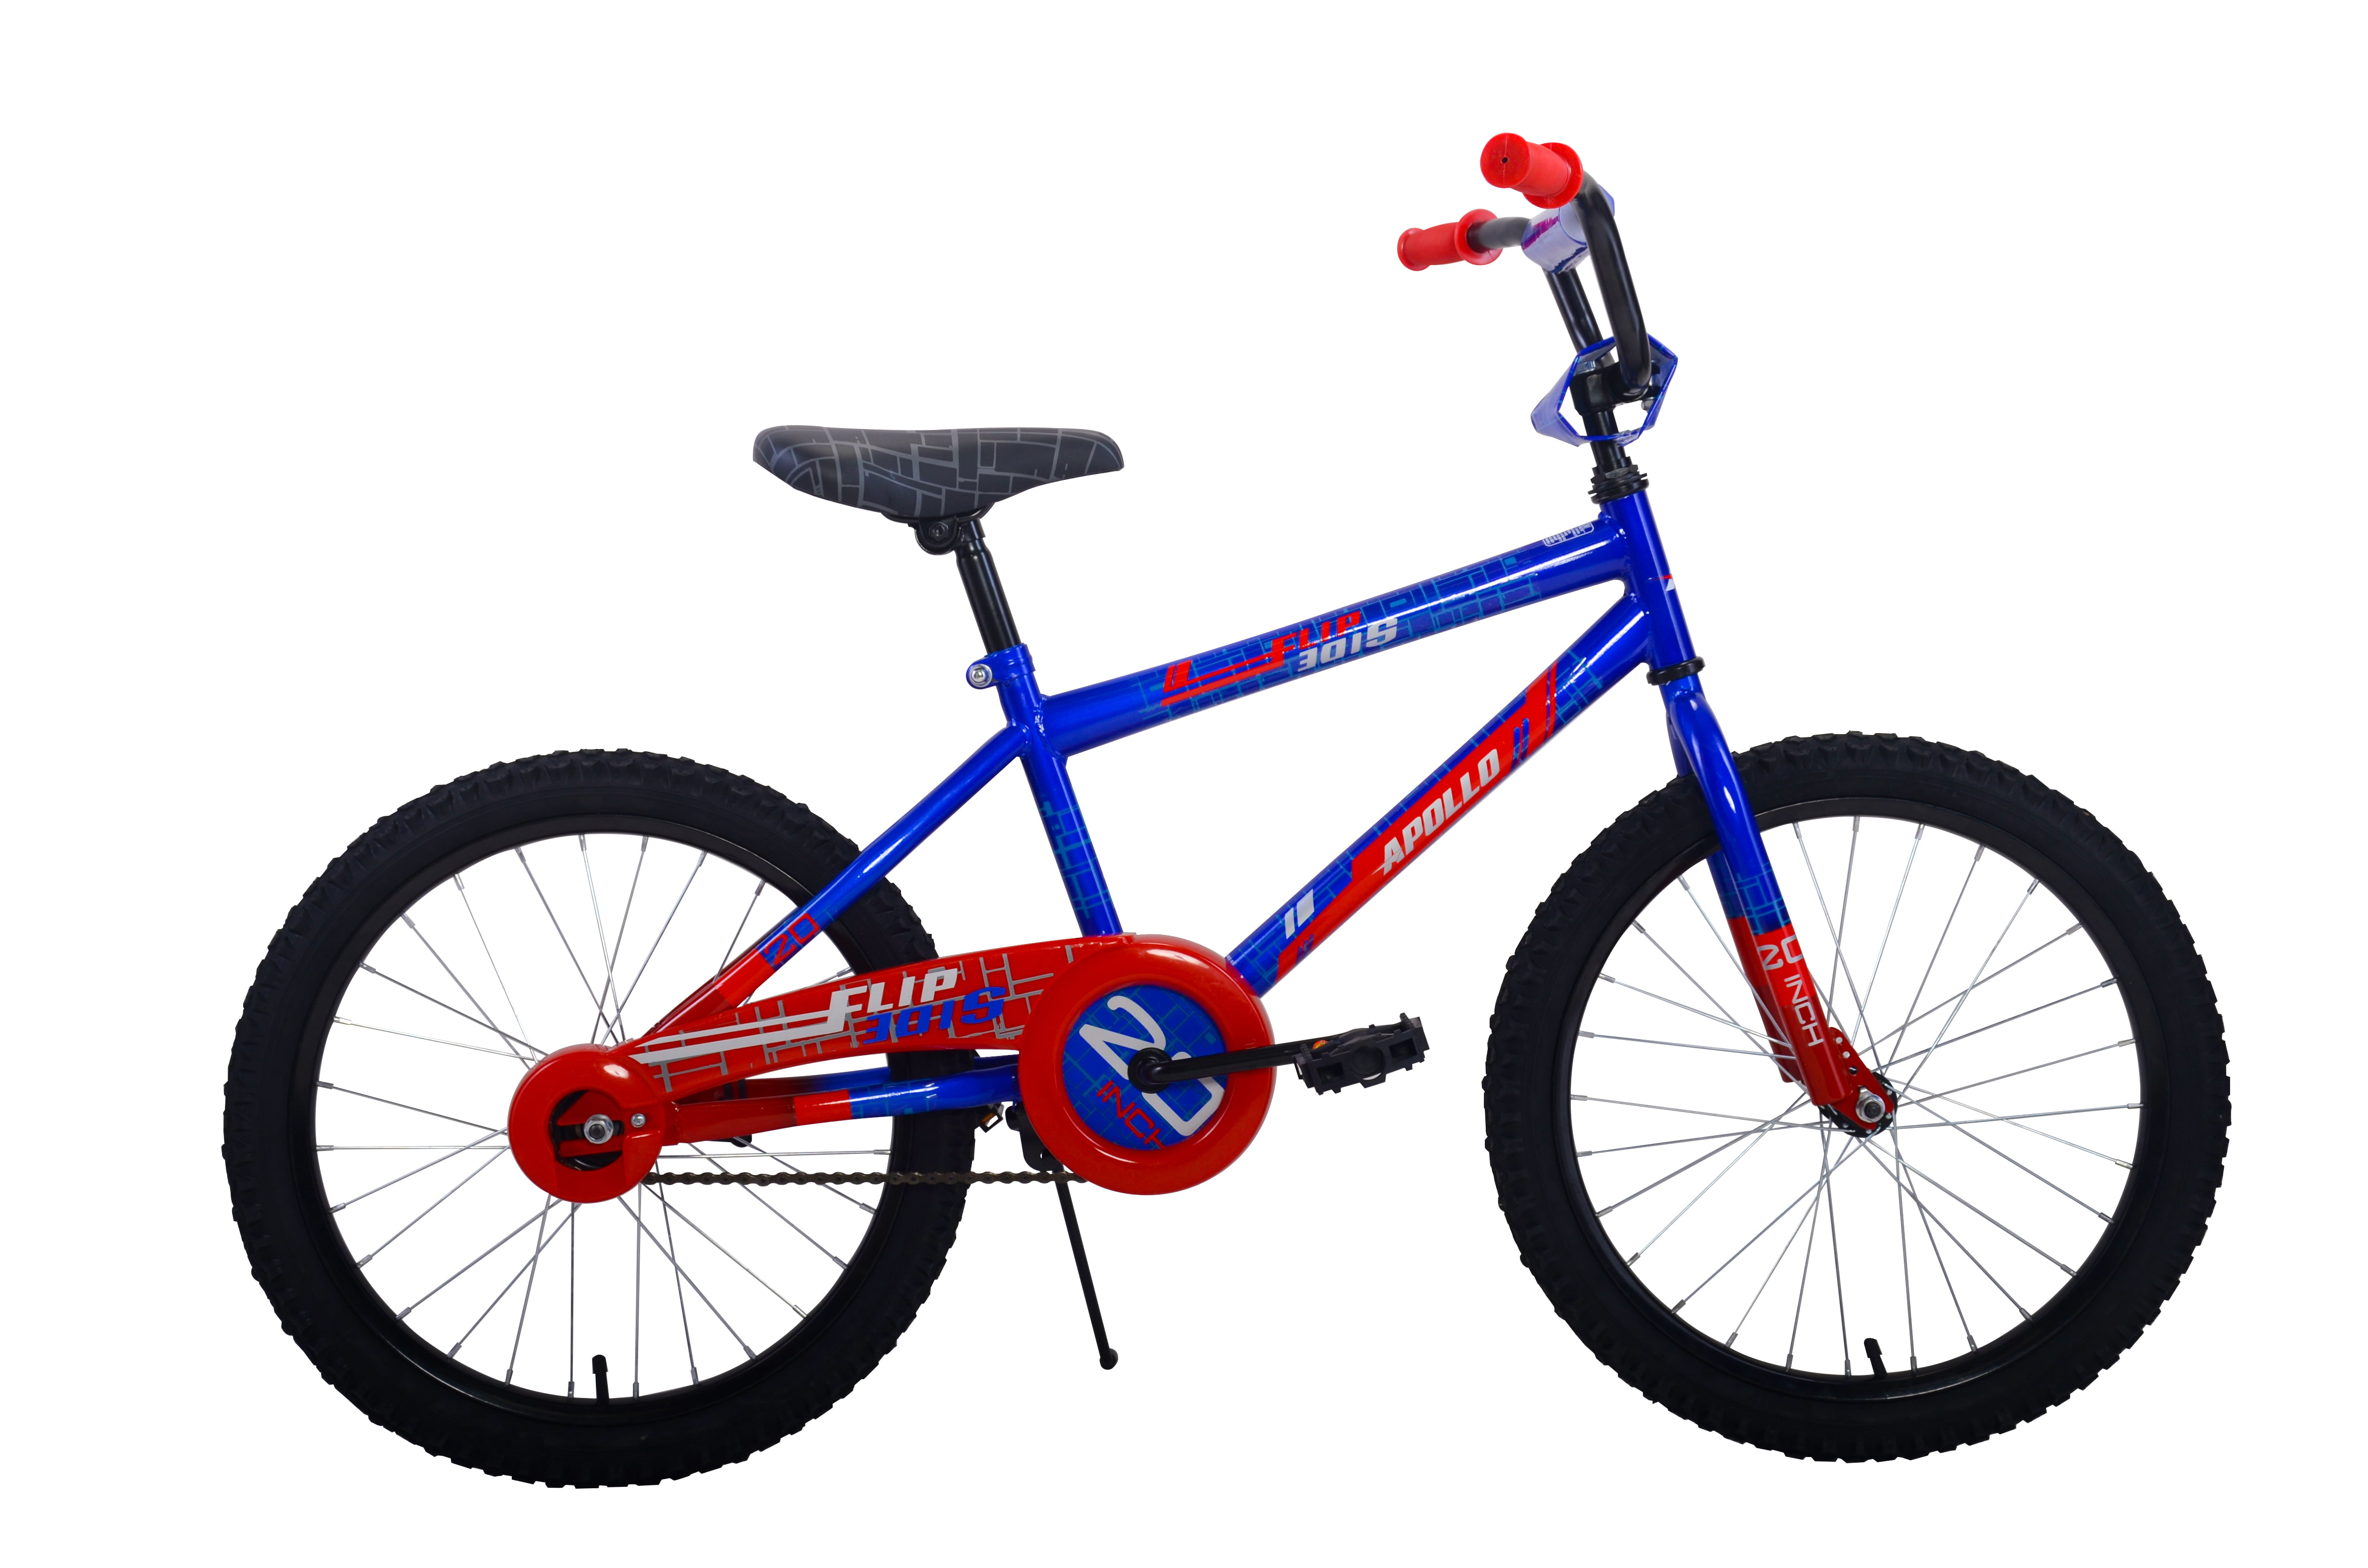 48 to 60 inches tall Ages 7 to 12 Silver Apollo Flipside 20 inch Kids Bicycle 